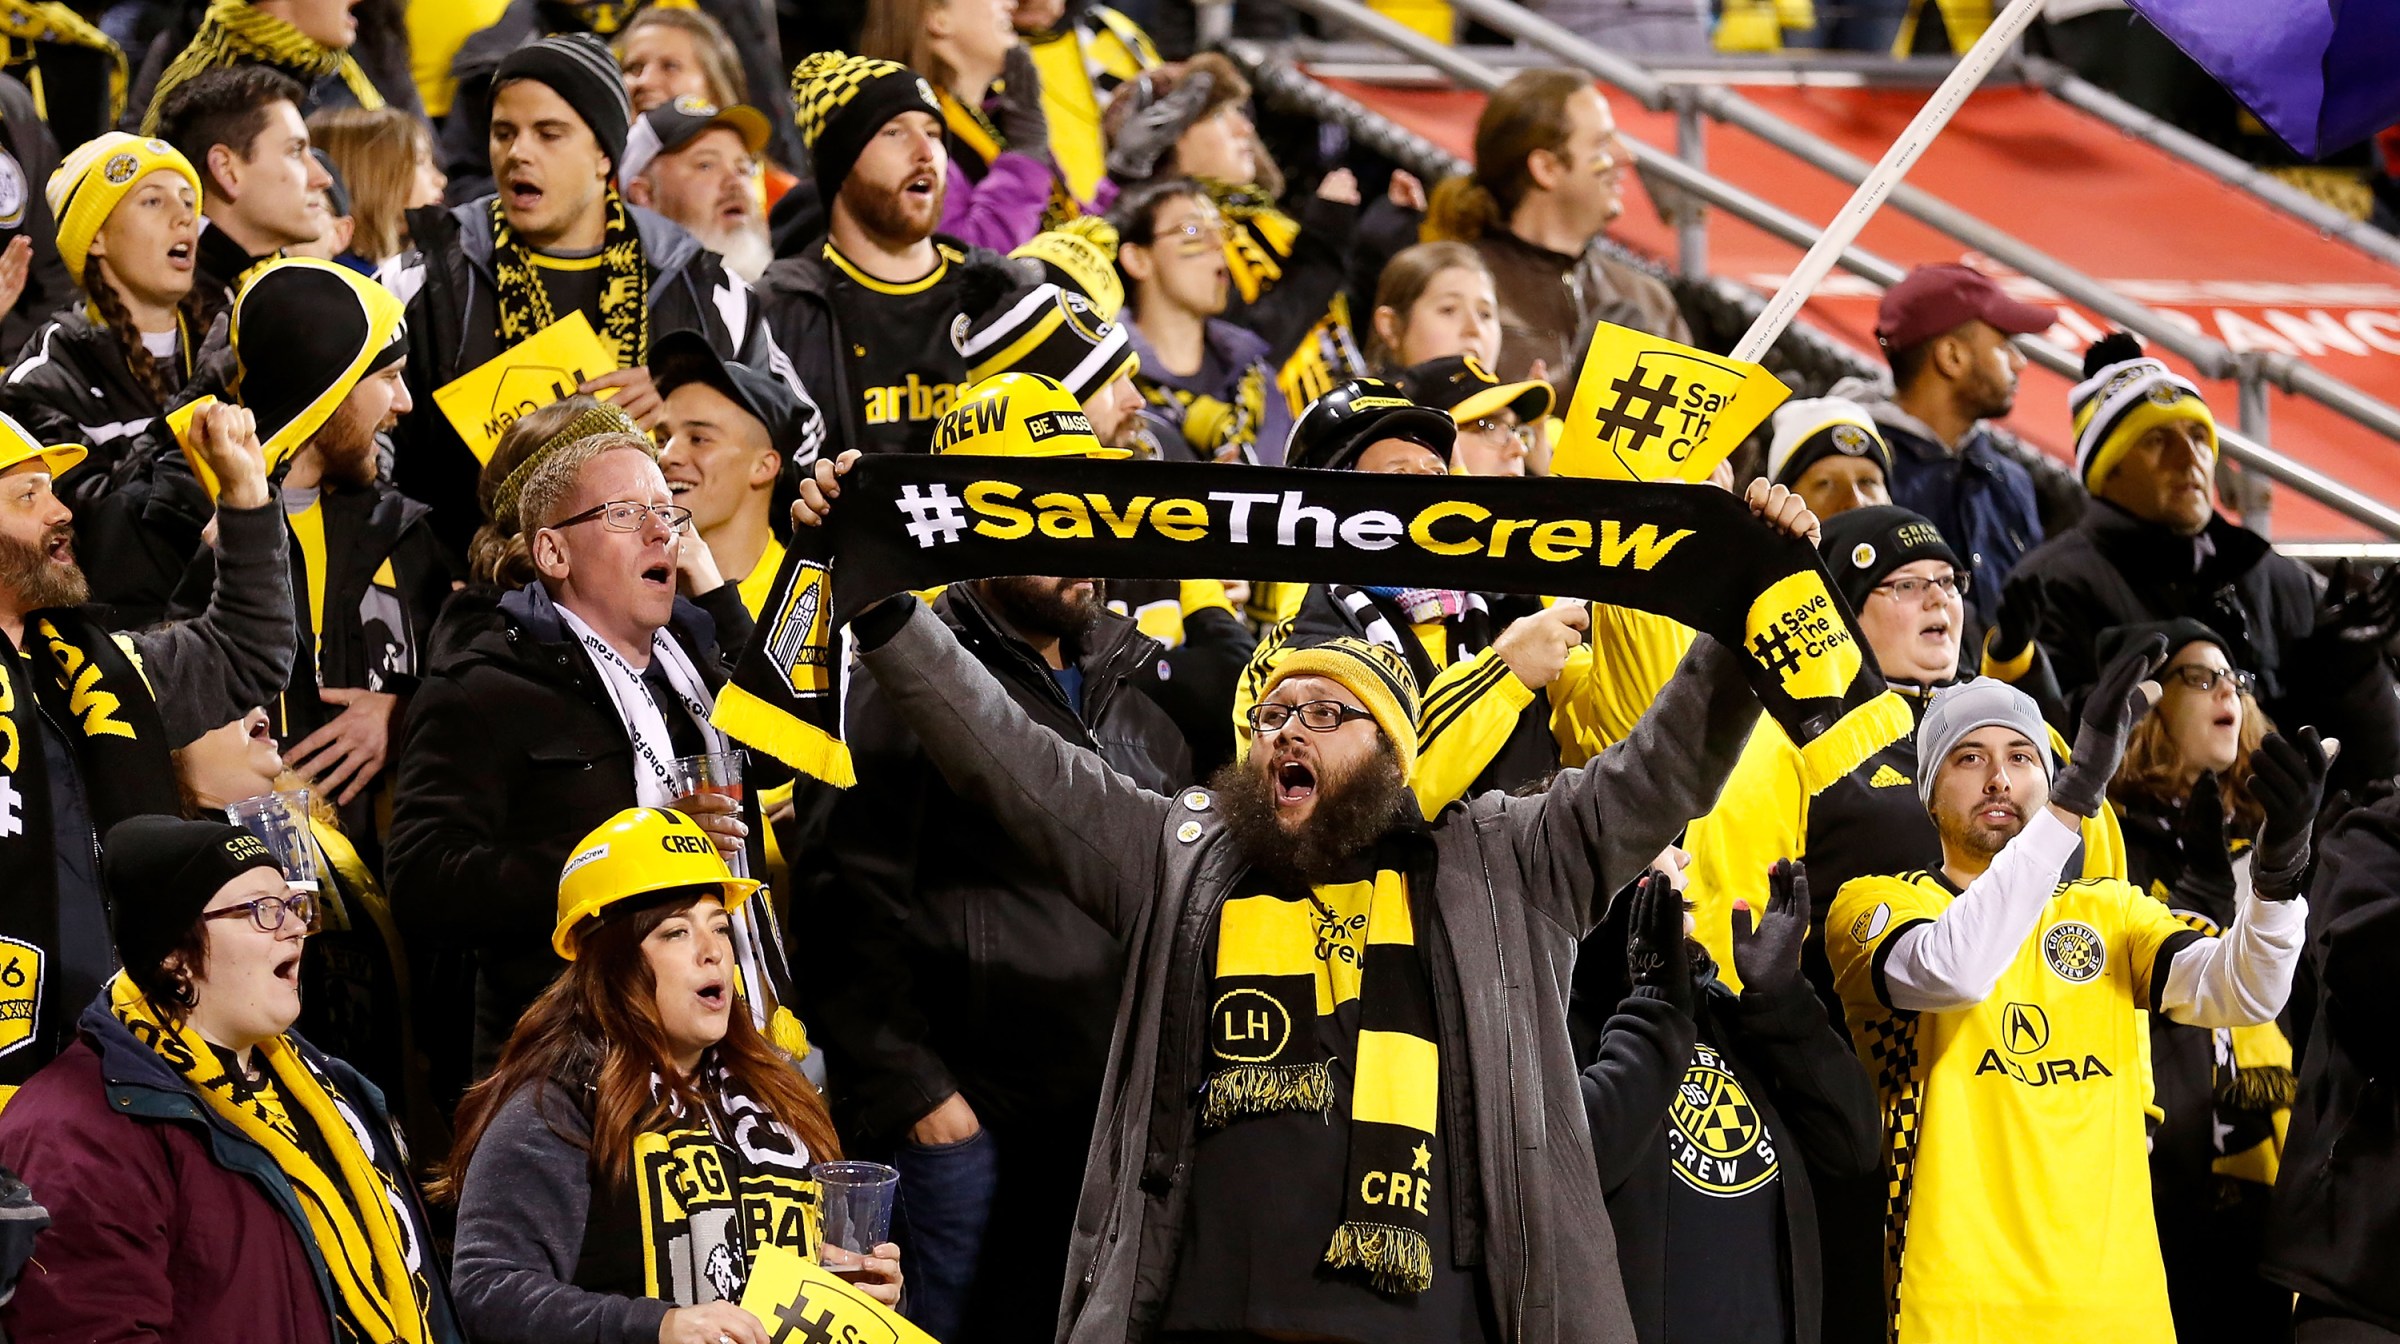 A fan of the Columbus Crew SC holds up a scarf showing his support for keeping the team in Columbus prior to the start of the match between the Columbus Crew SC and the Toronto FC at MAPFRE Stadium on November 21, 2017 in Columbus, Ohio.